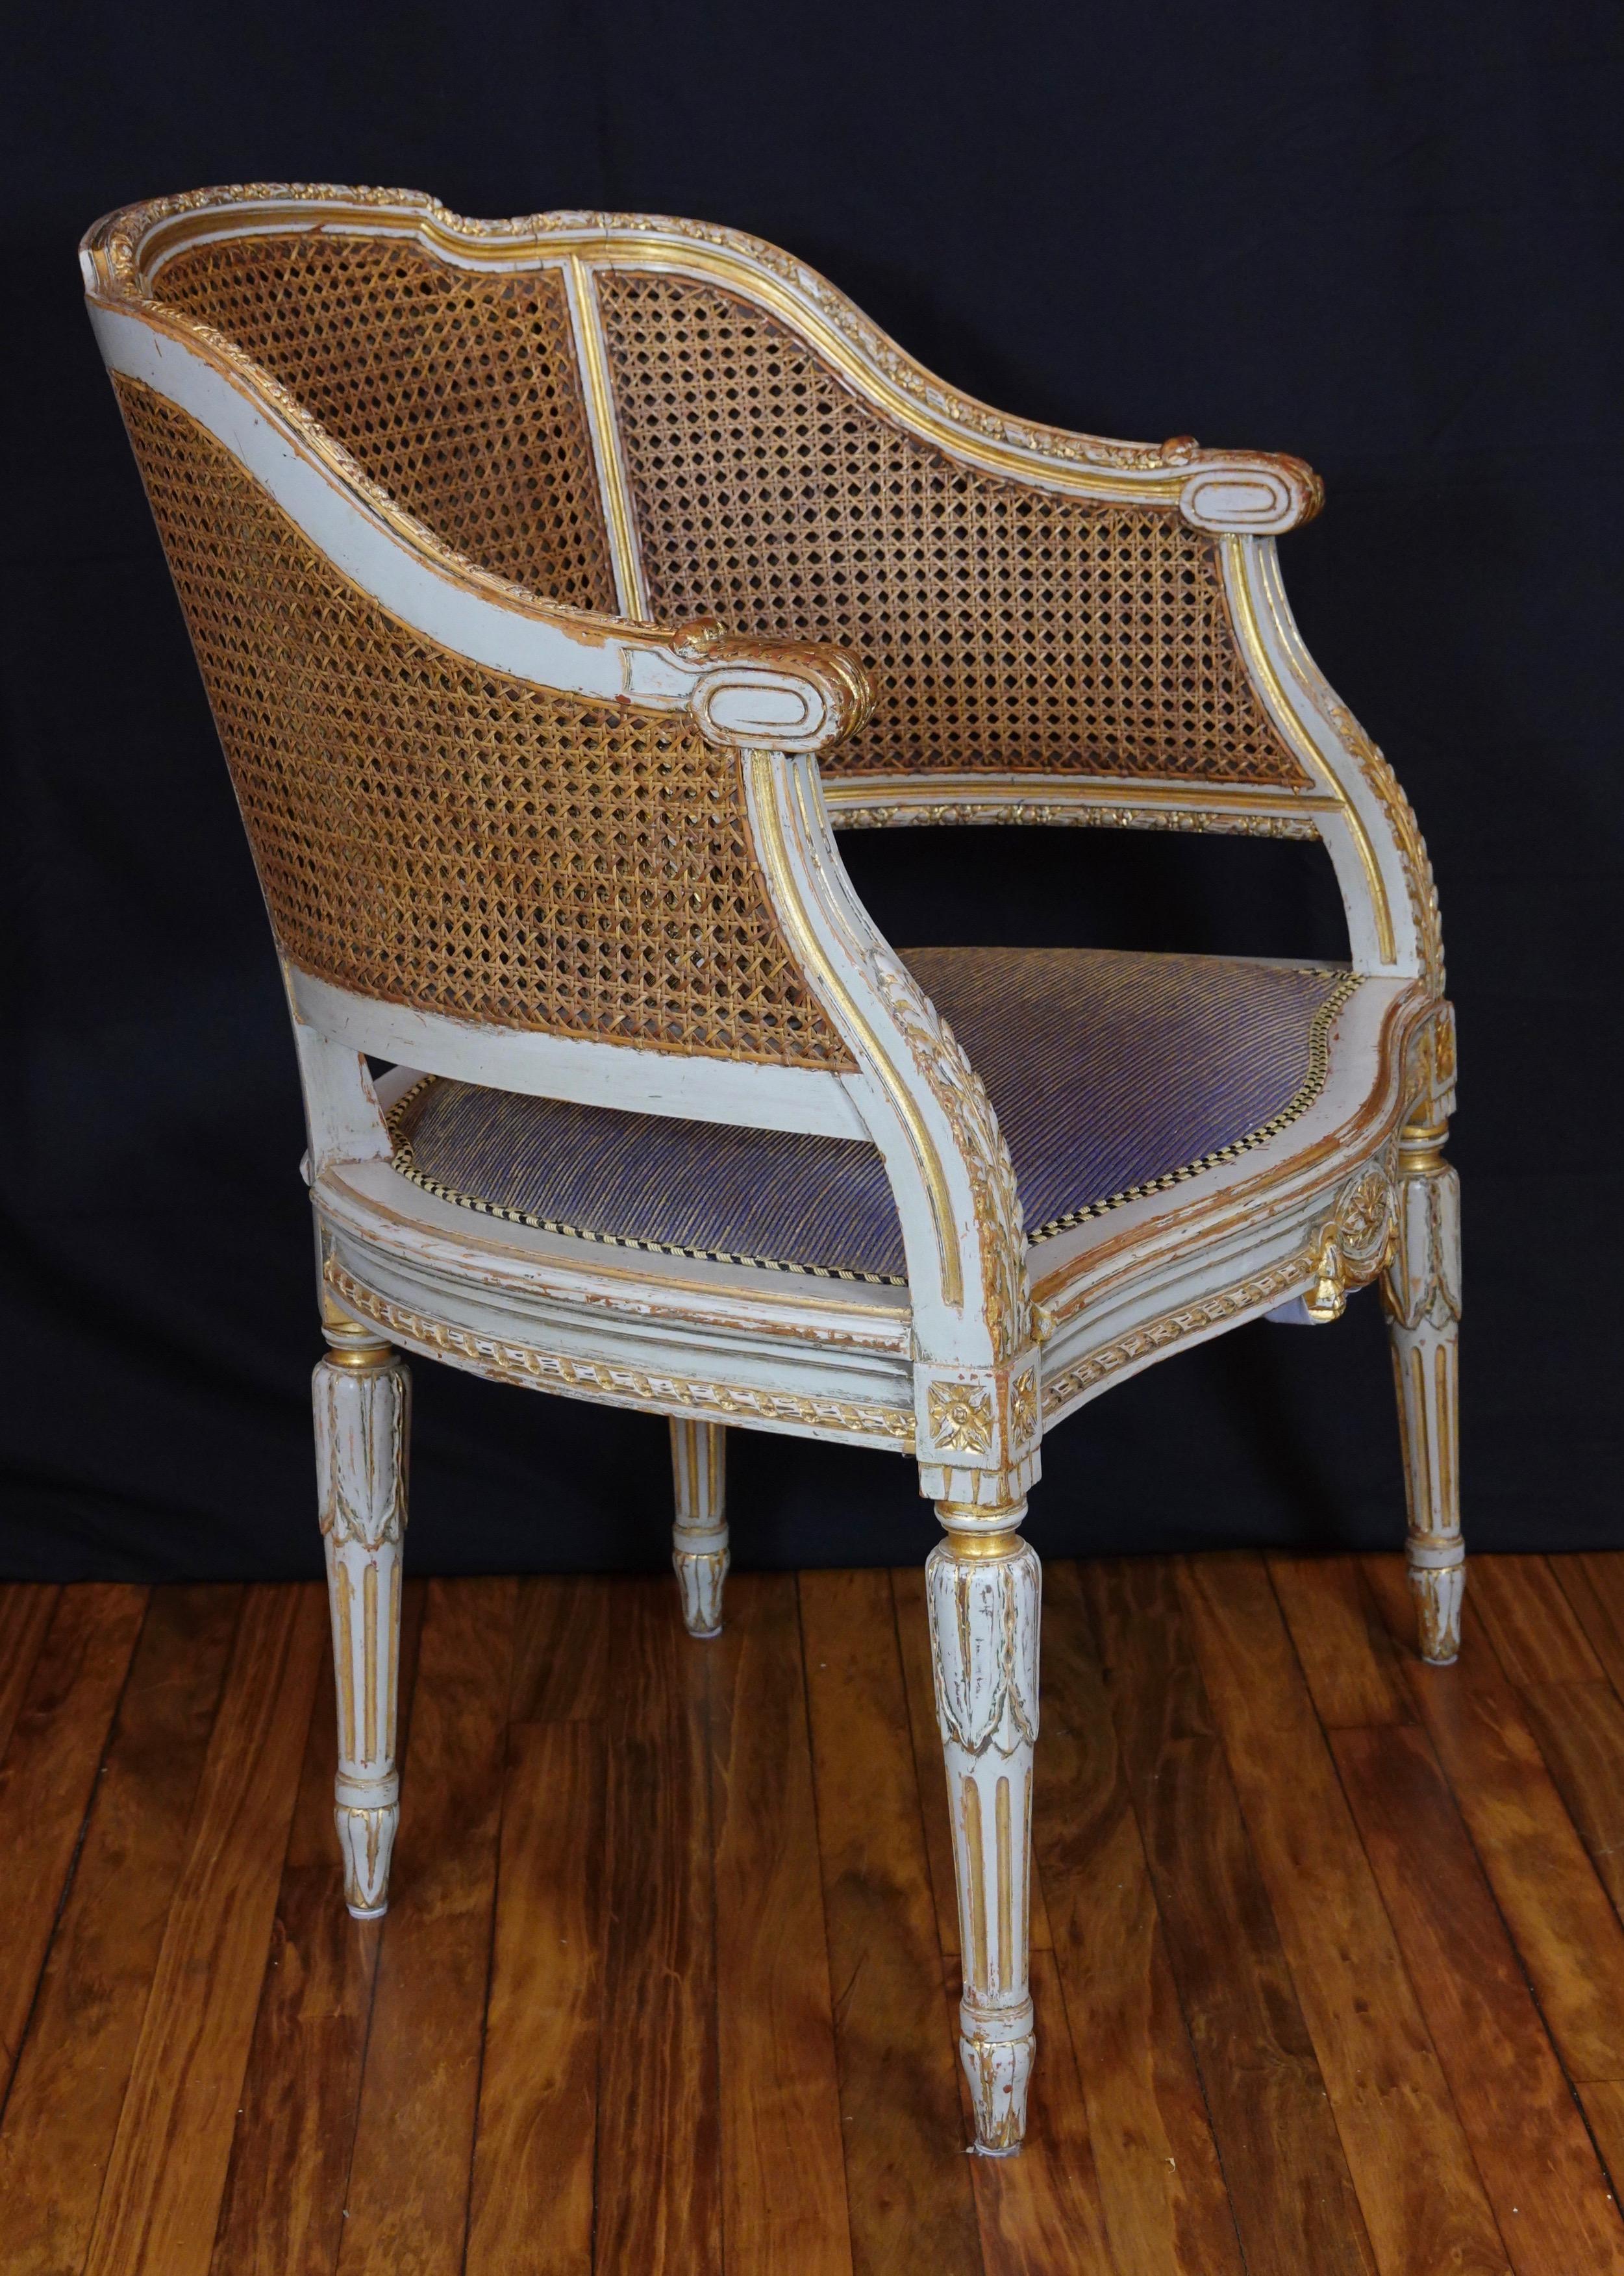 Polychromed French Louis XVI Style Desk Chair with Caned Back and Upholstered Seat